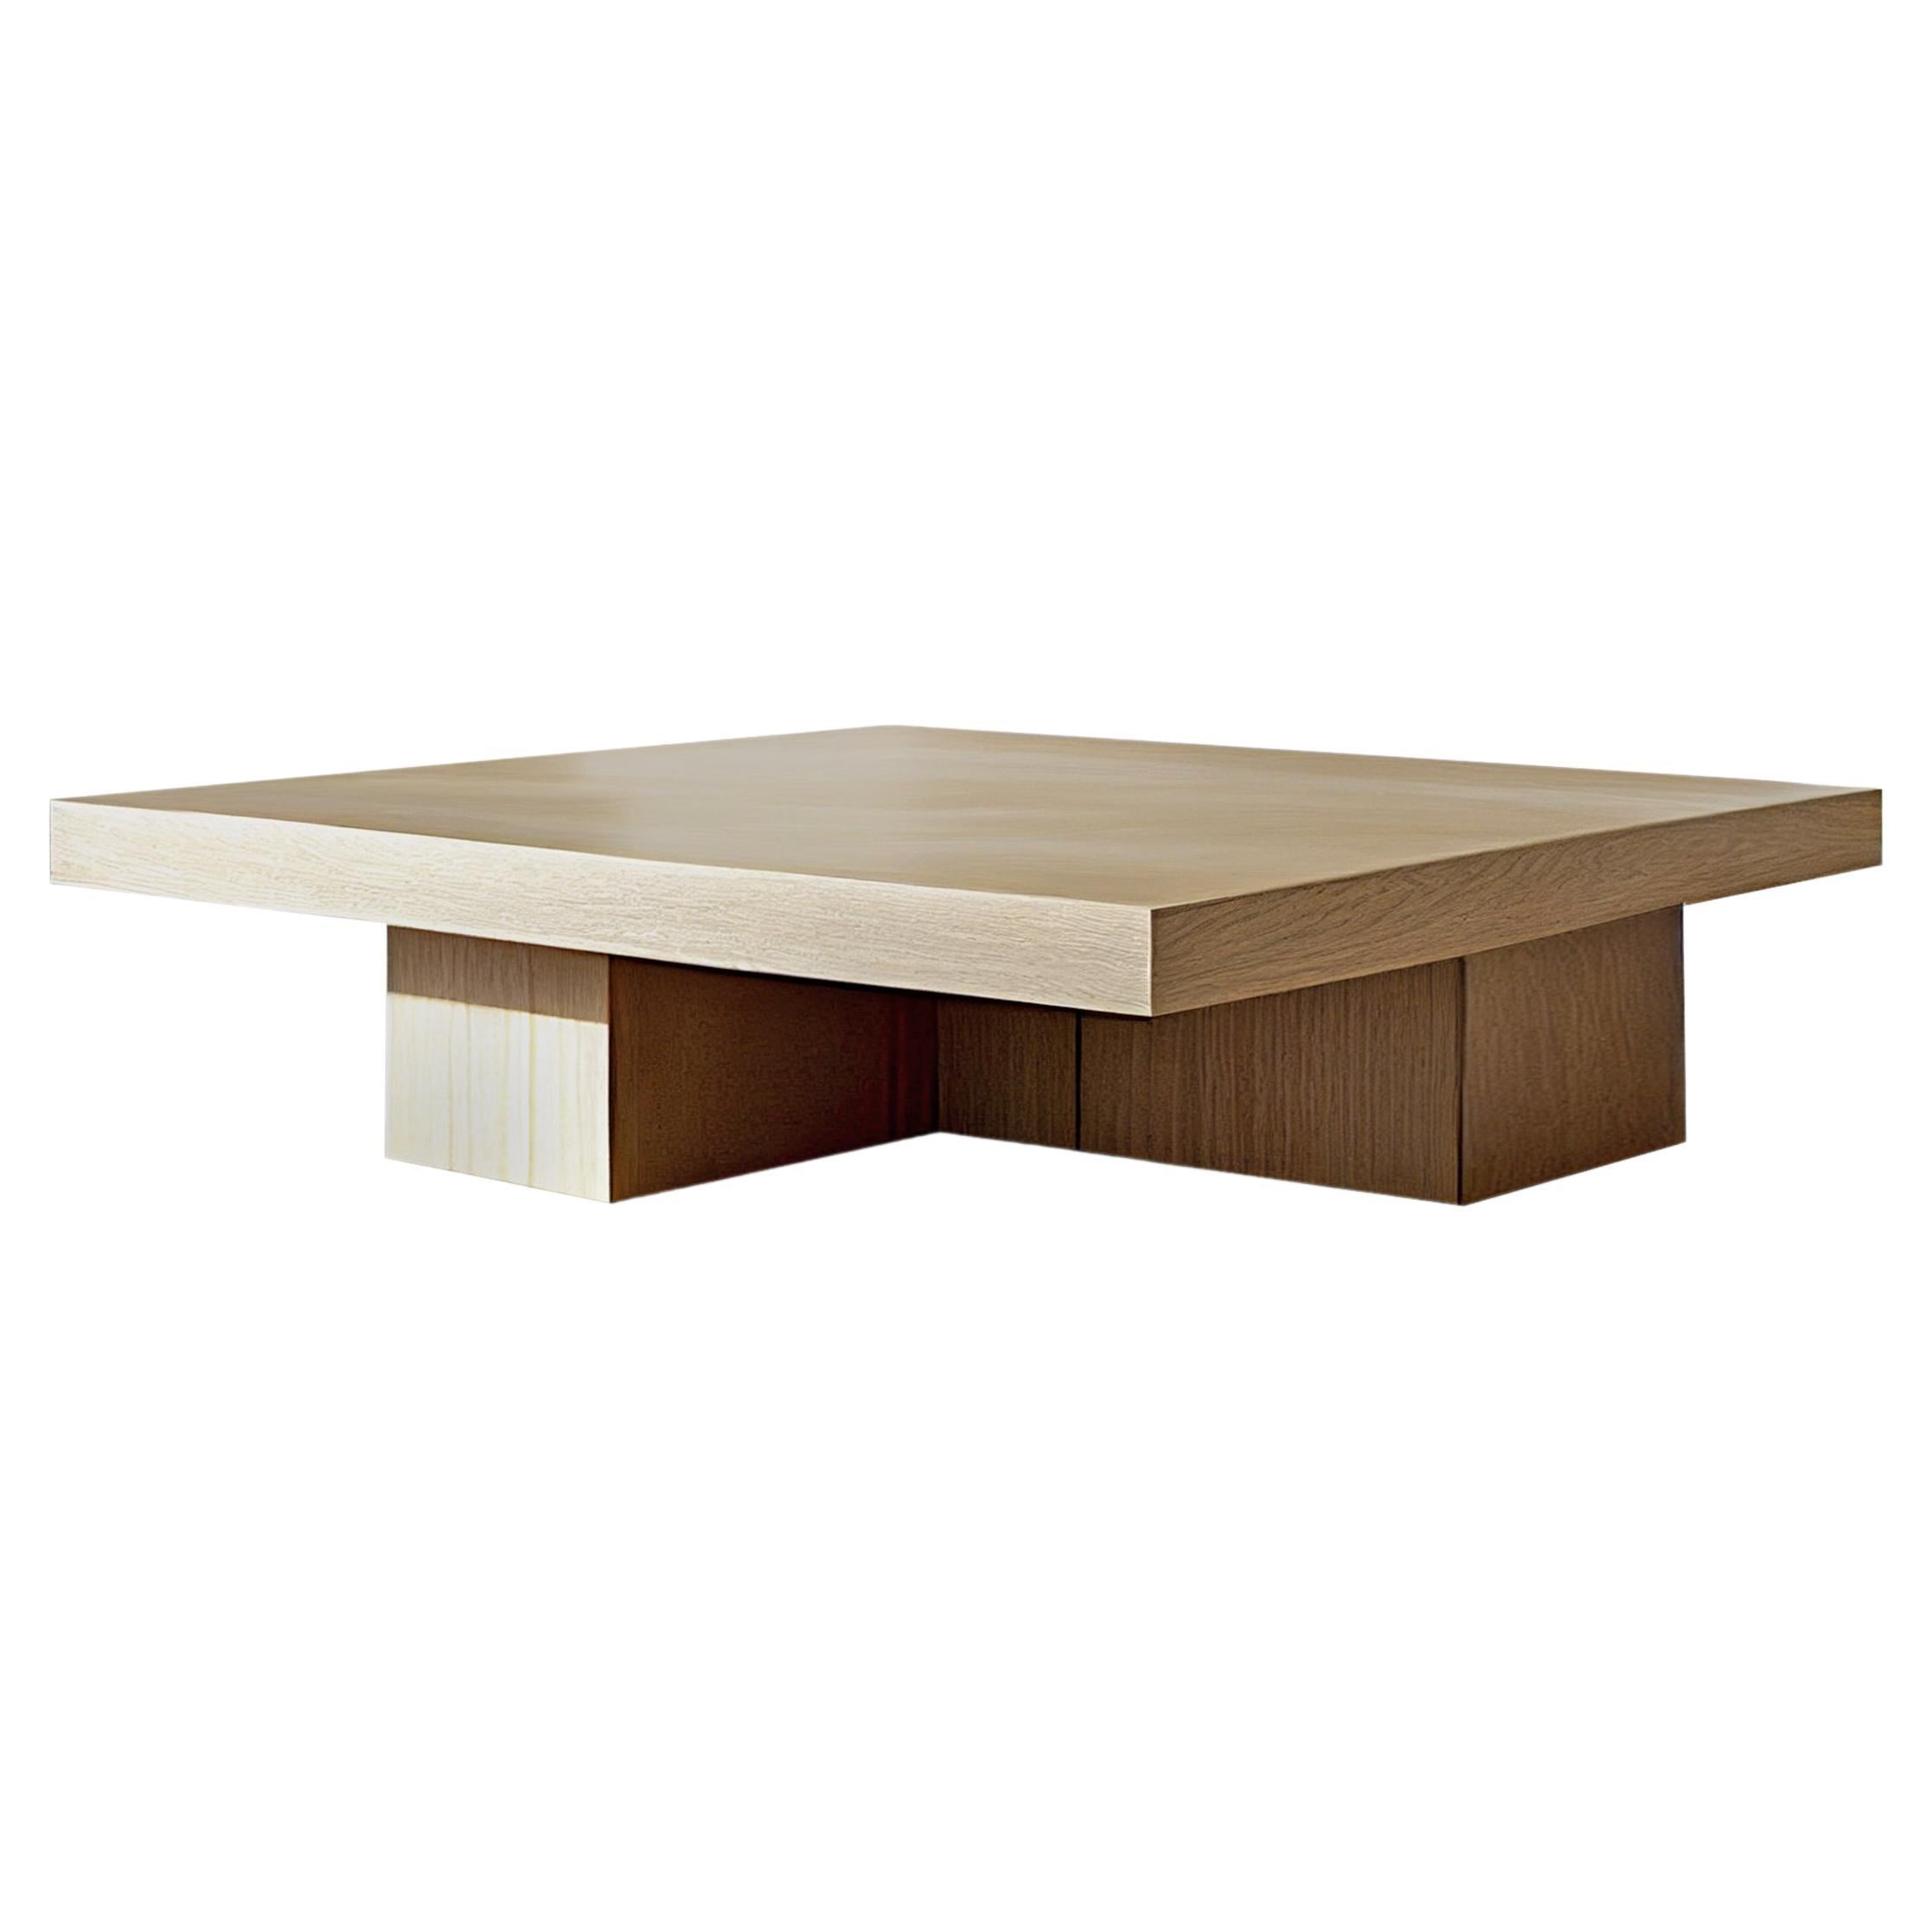 Square Coffee Table with Thick Cruciform Base Made with Beautiful Grey Veneer